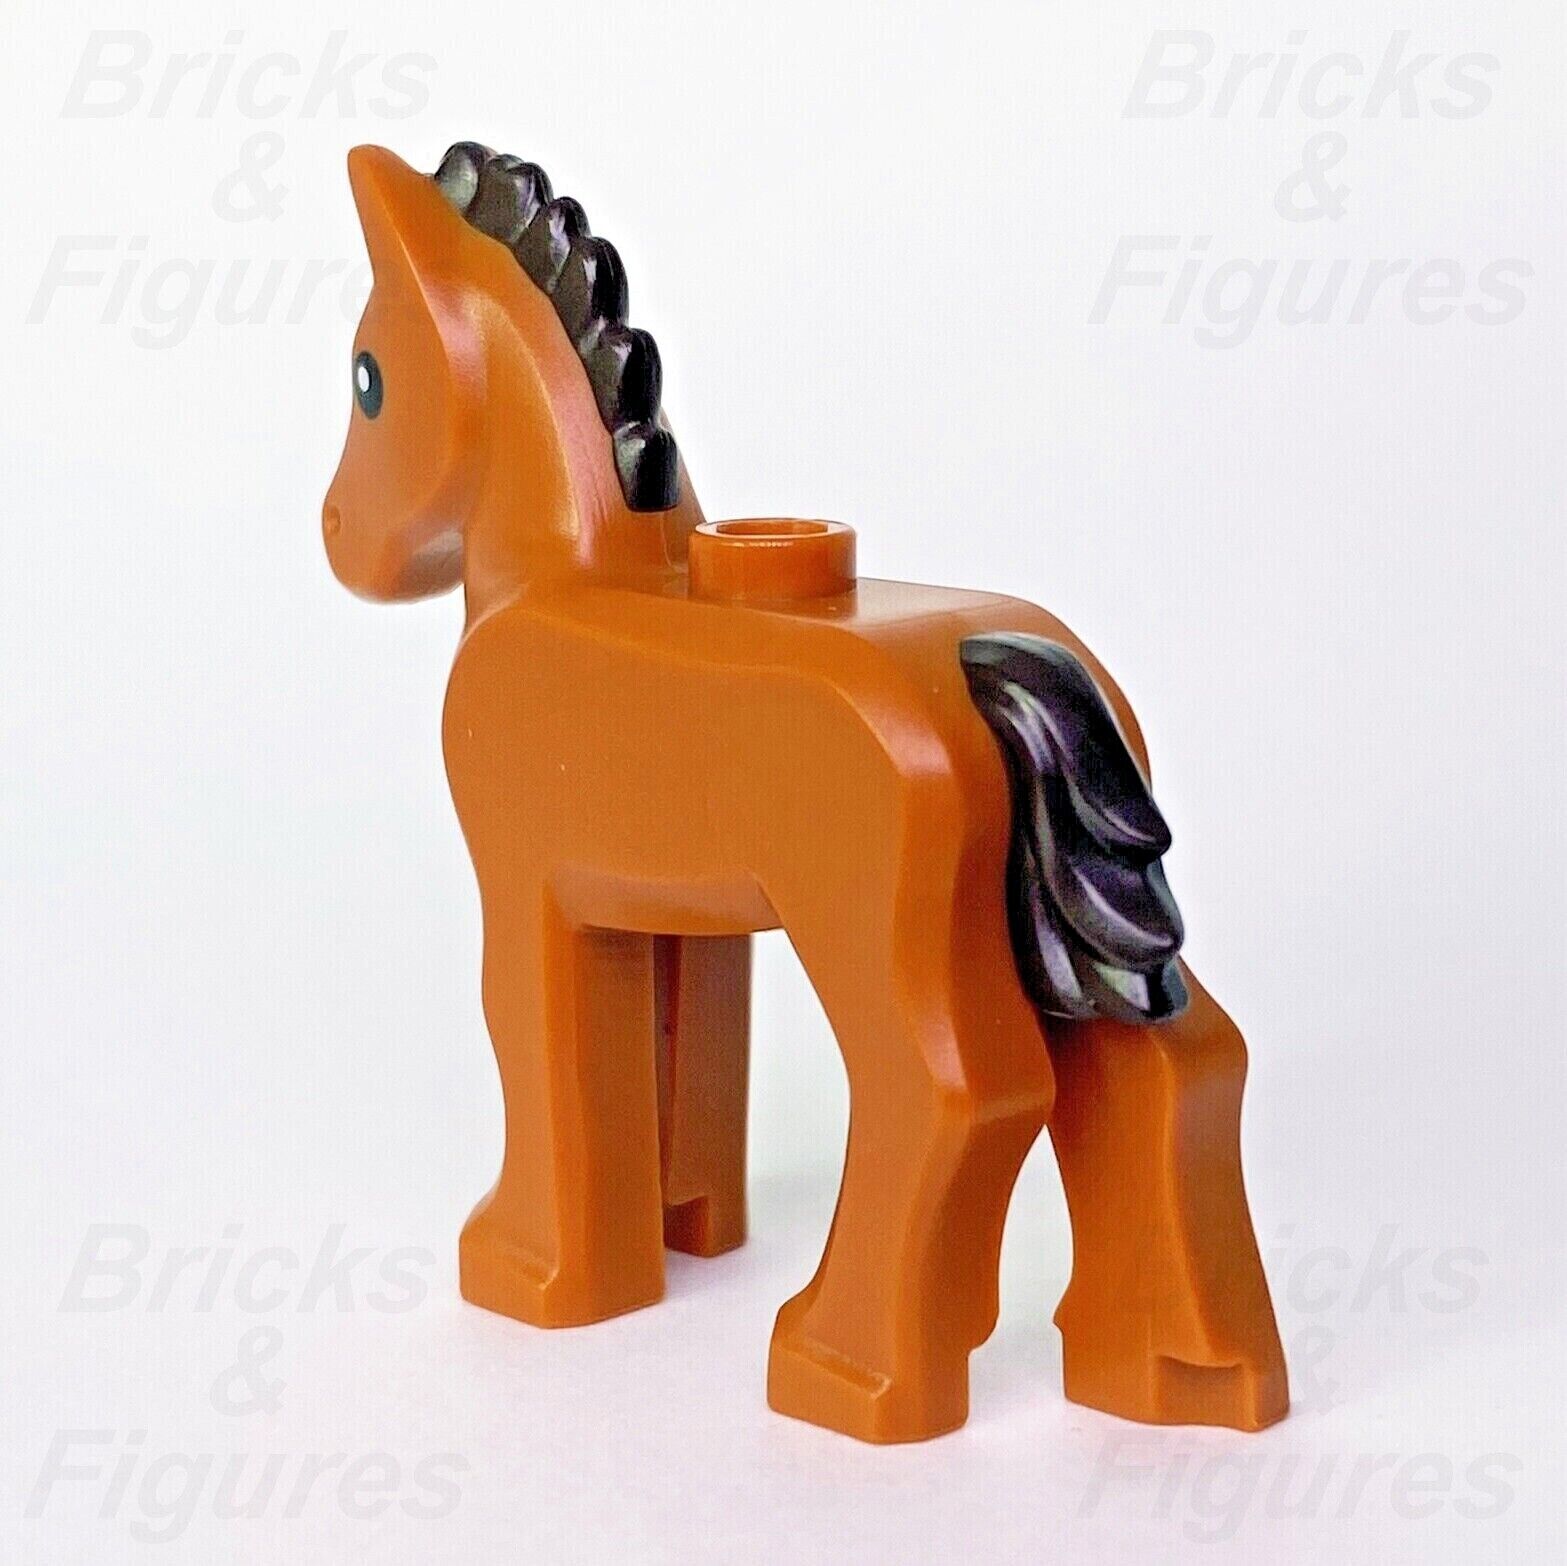 New Collectible Minifigures LEGO Baby Horse Foal Series 22 Animal Part 71032 - Bricks & Figures